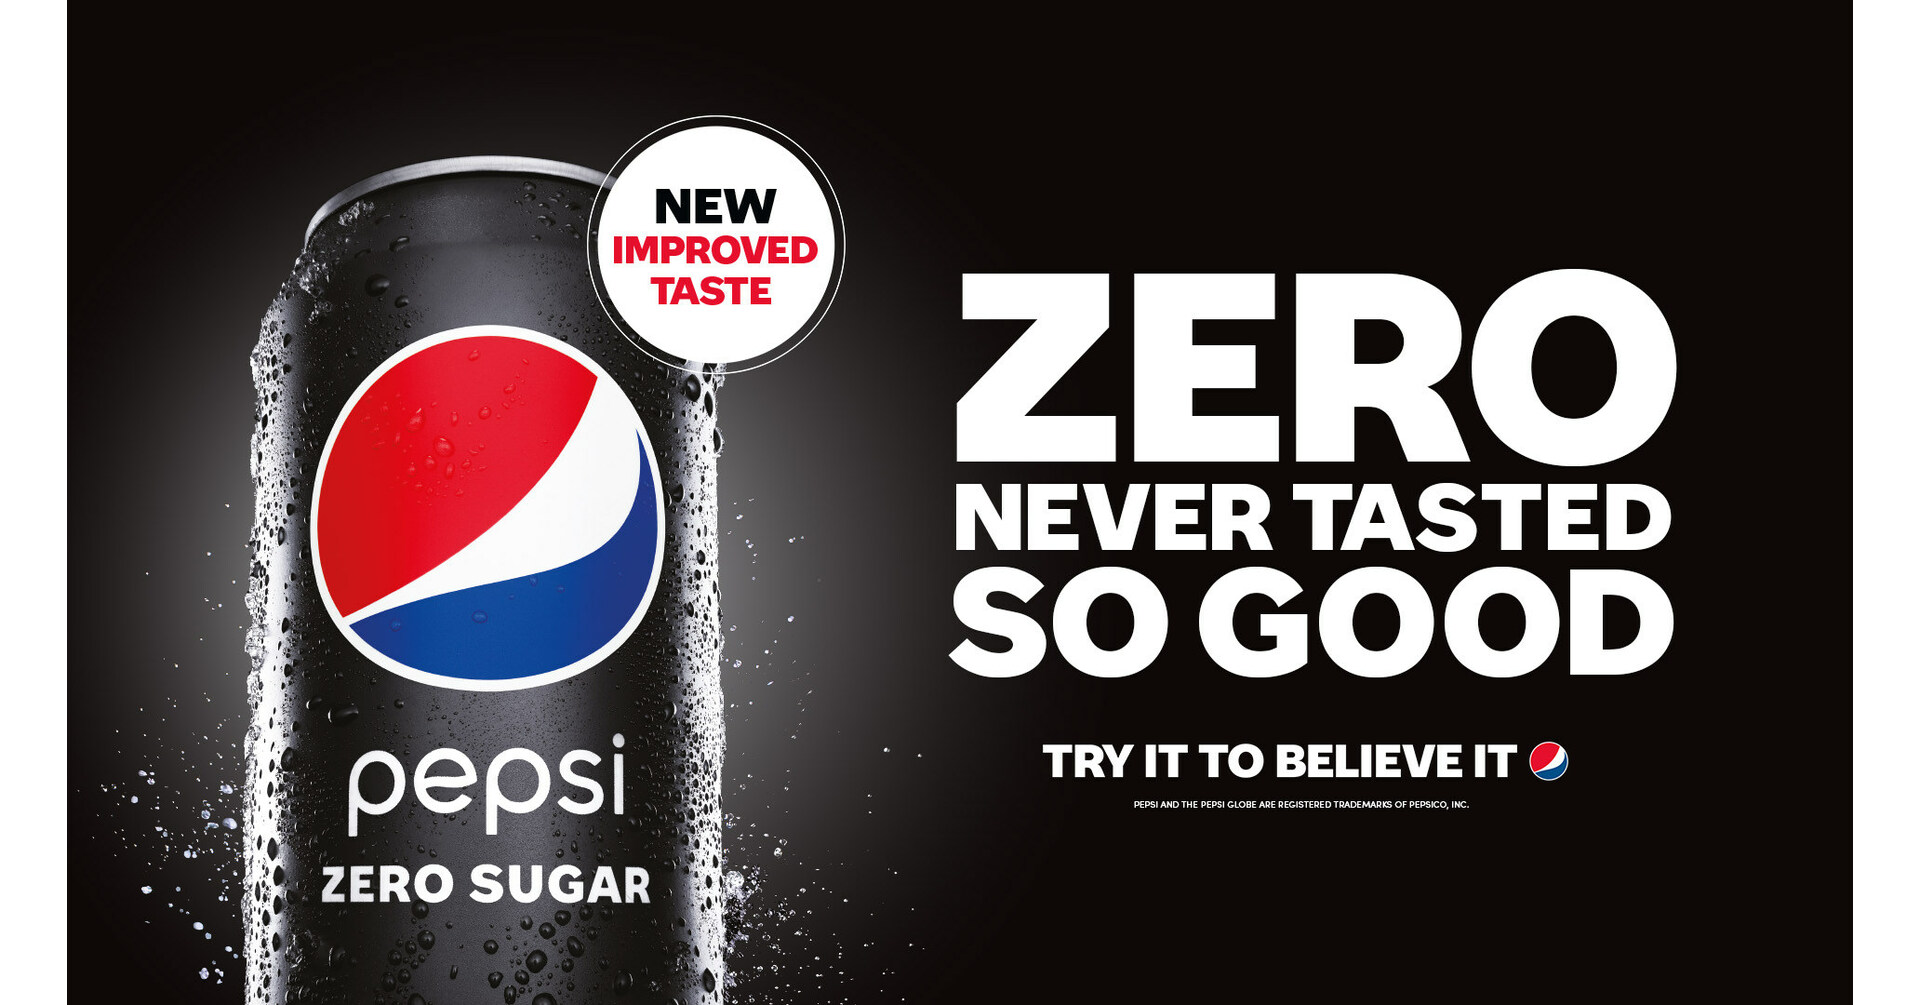 Everyone can get a free Pepsi to celebrate the brand's 125th